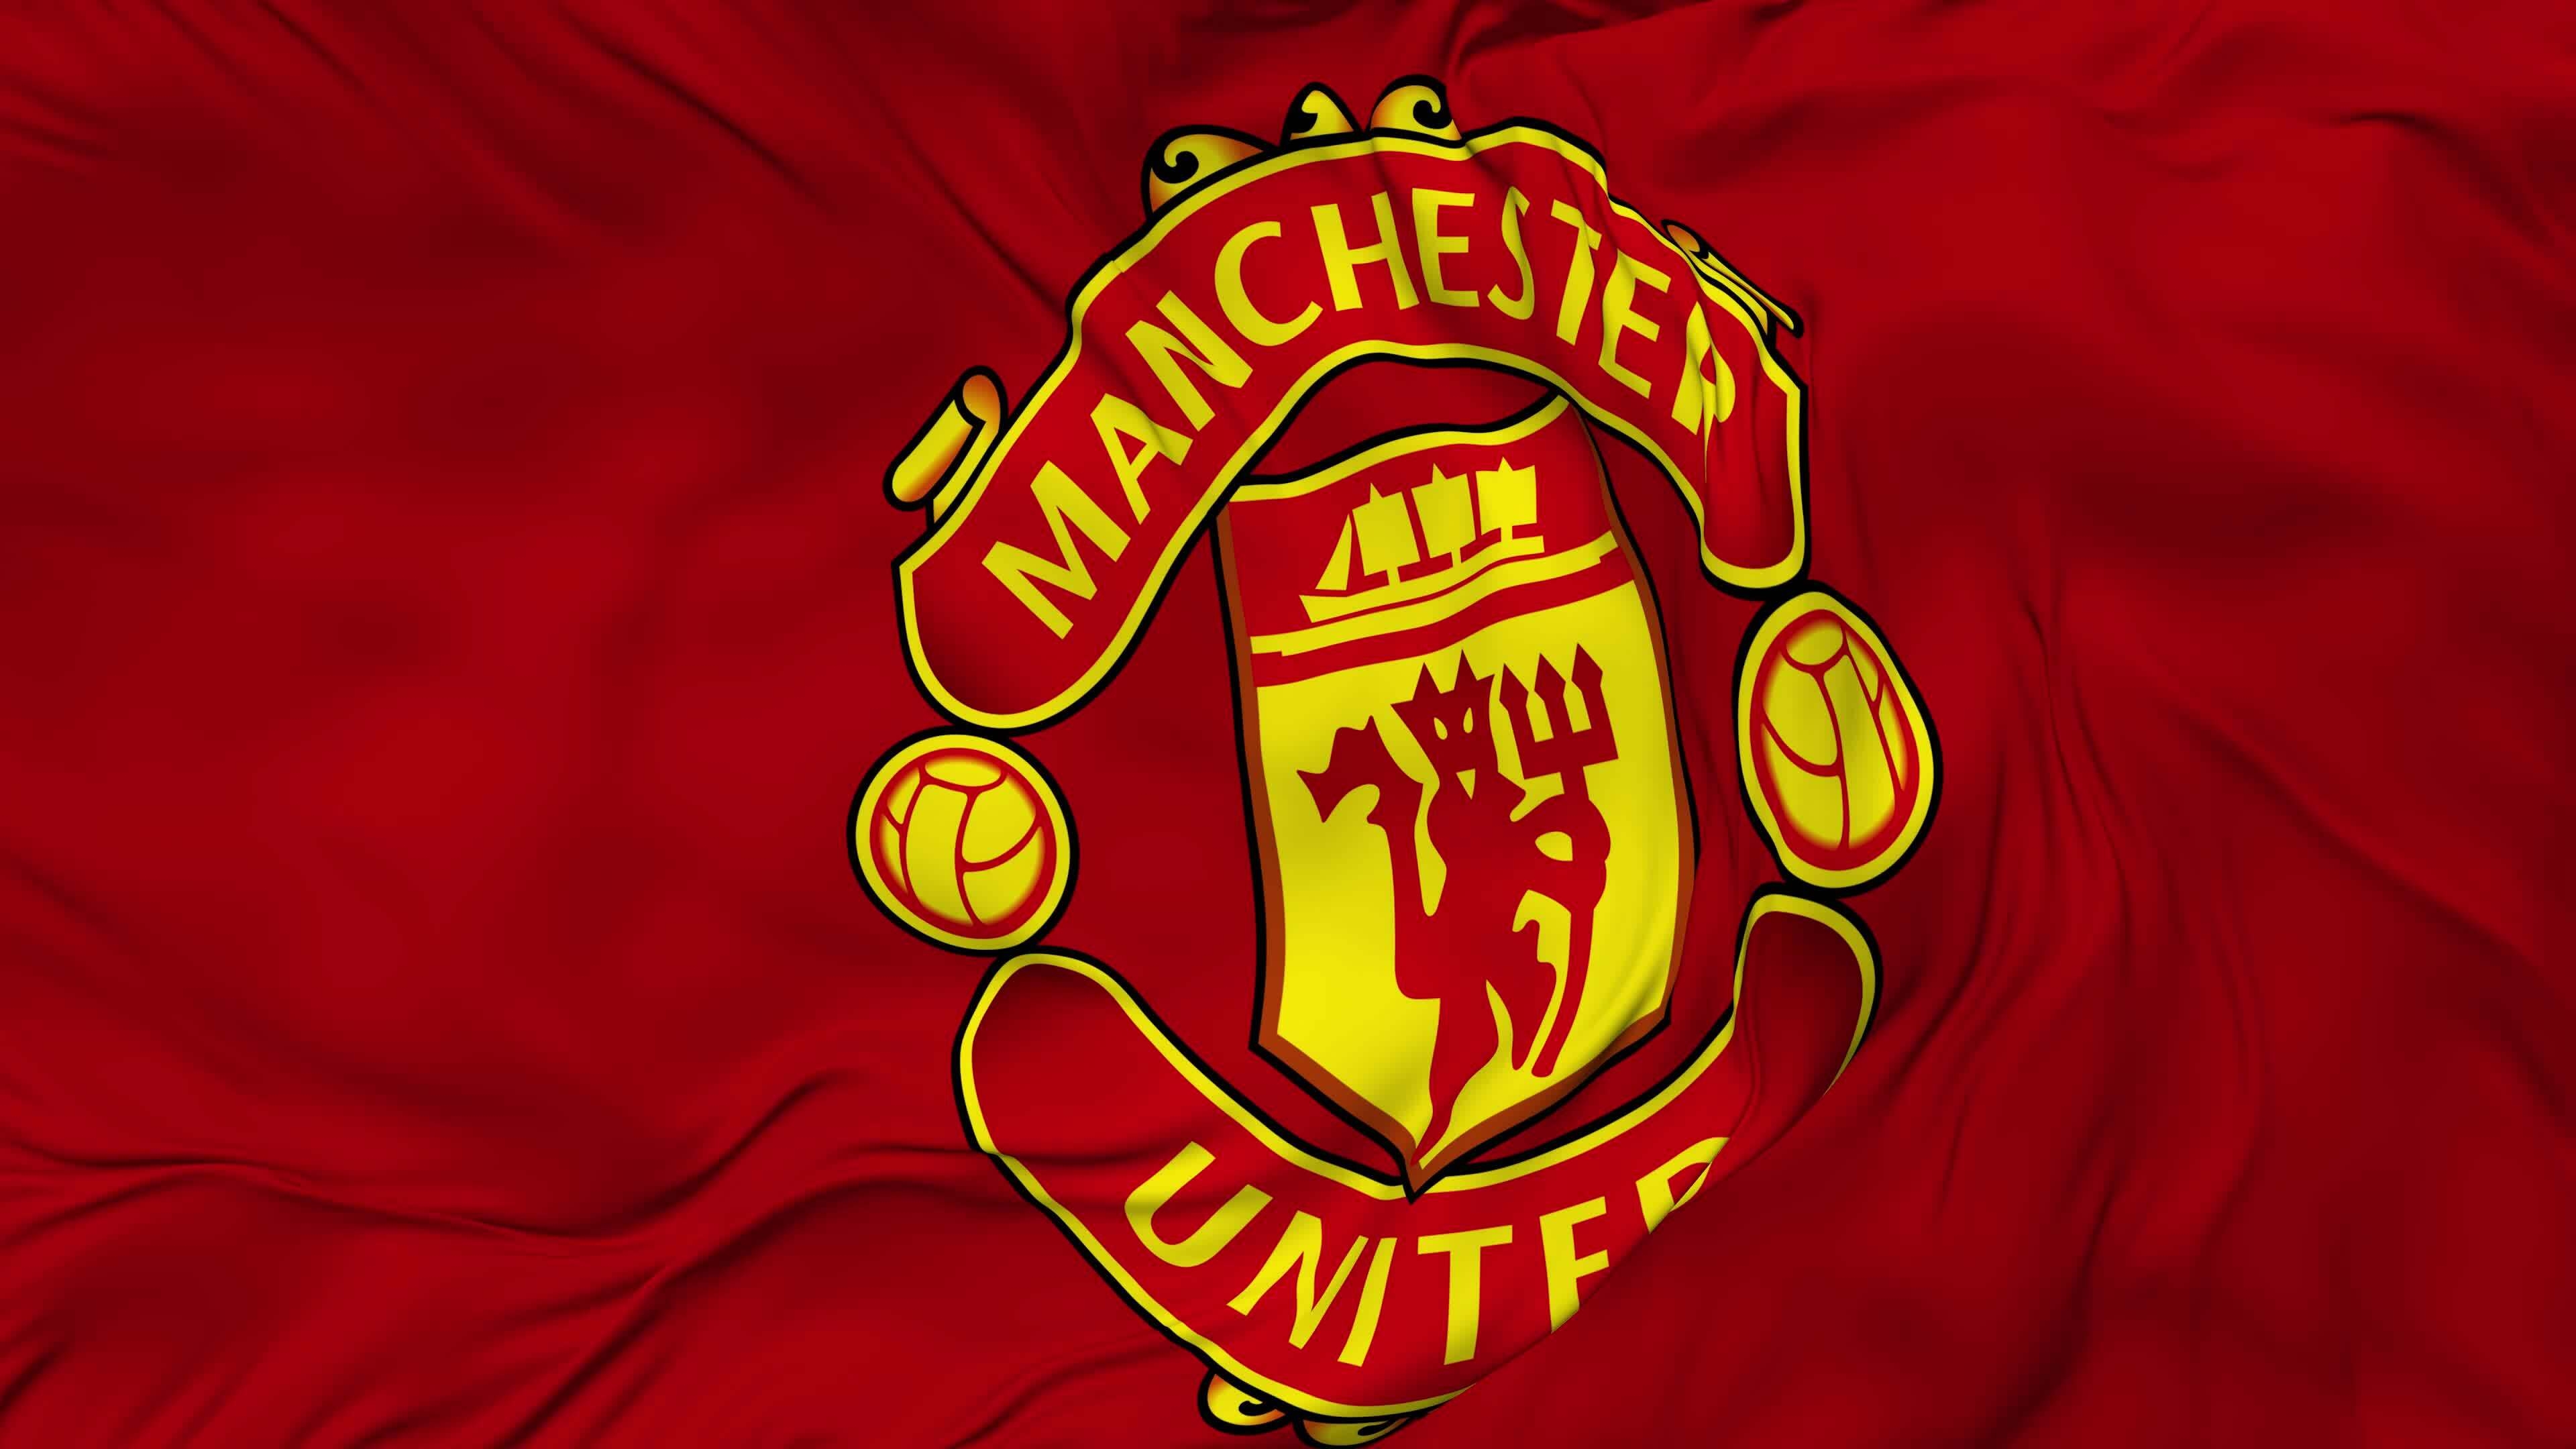 HD wallpaper, Logo, Football Club, Flag, Manchester United, Red Background